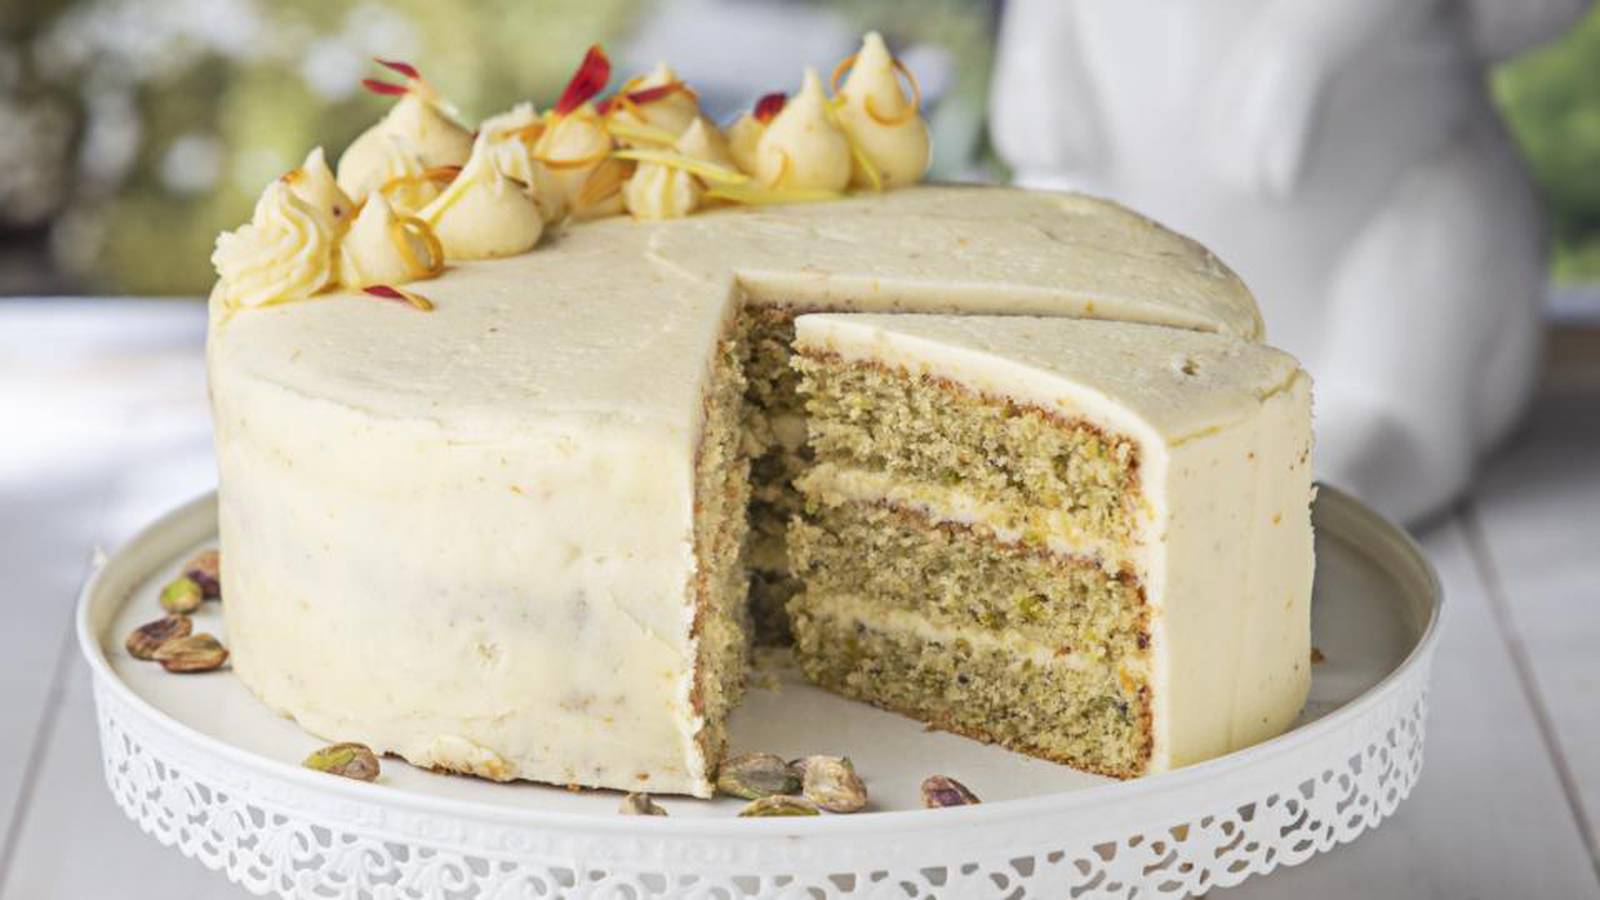 Aoife Noonan: An Easter cake that transports me to Rome – The Irish Times